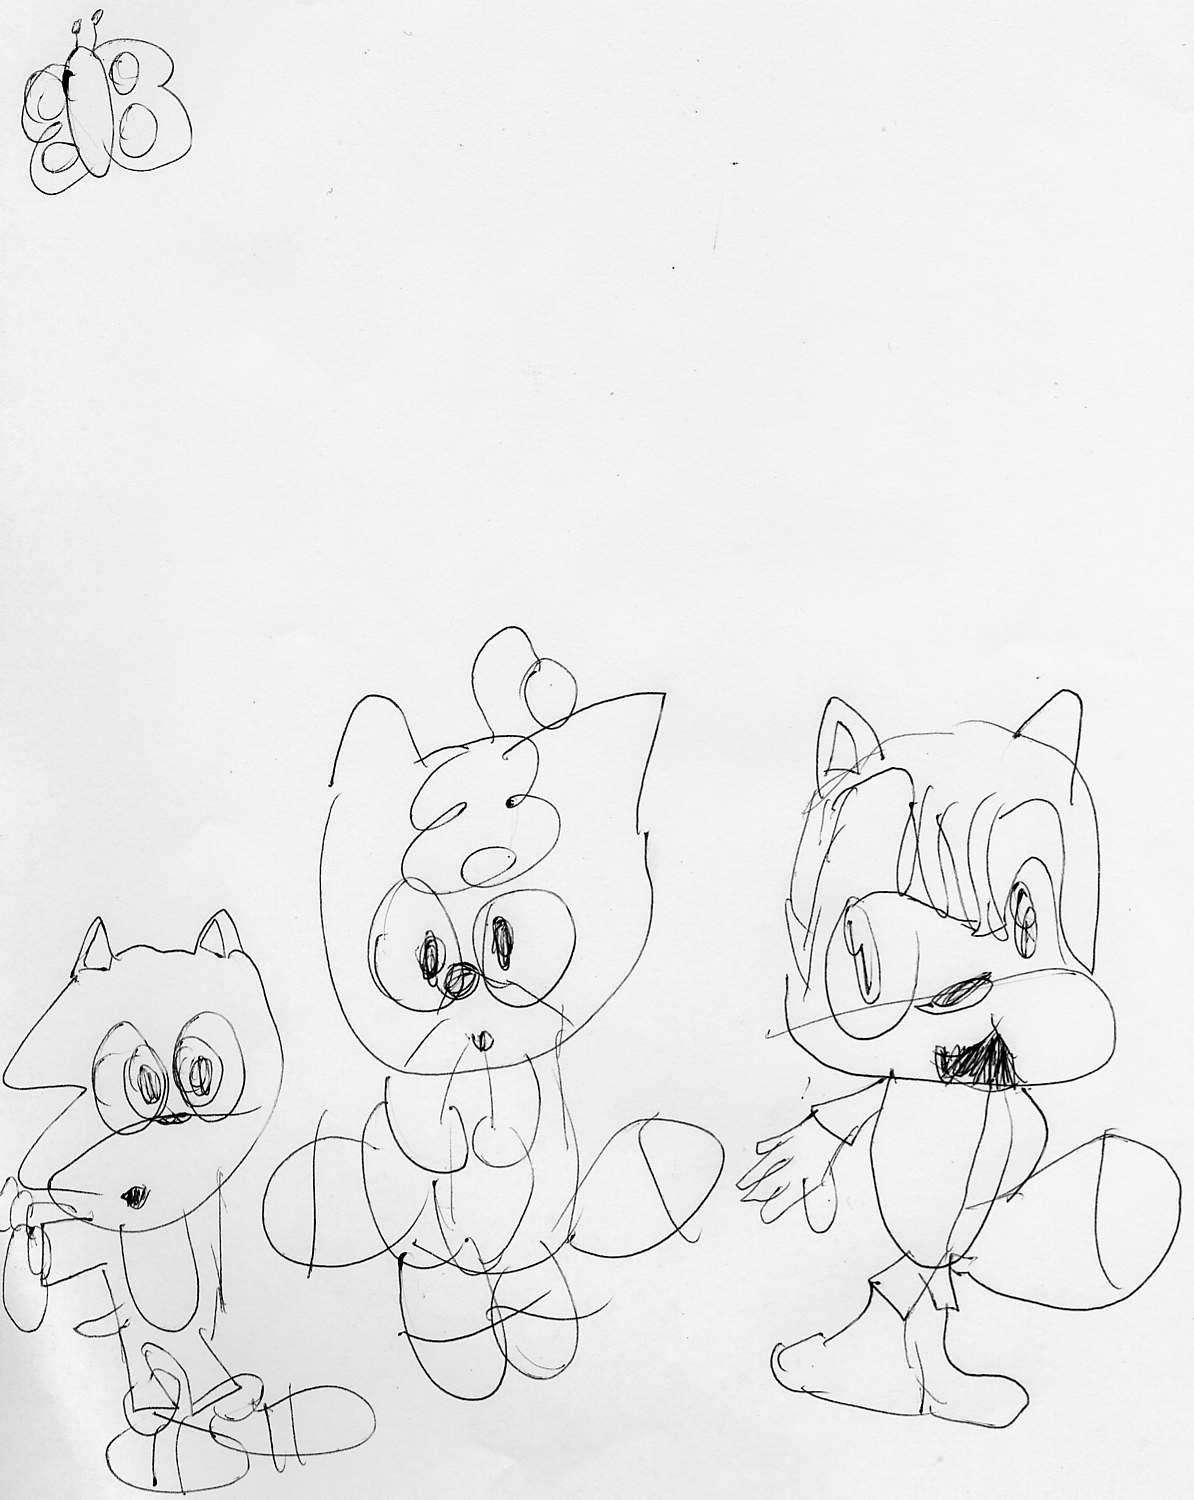 tails doll and other people by Kacheek